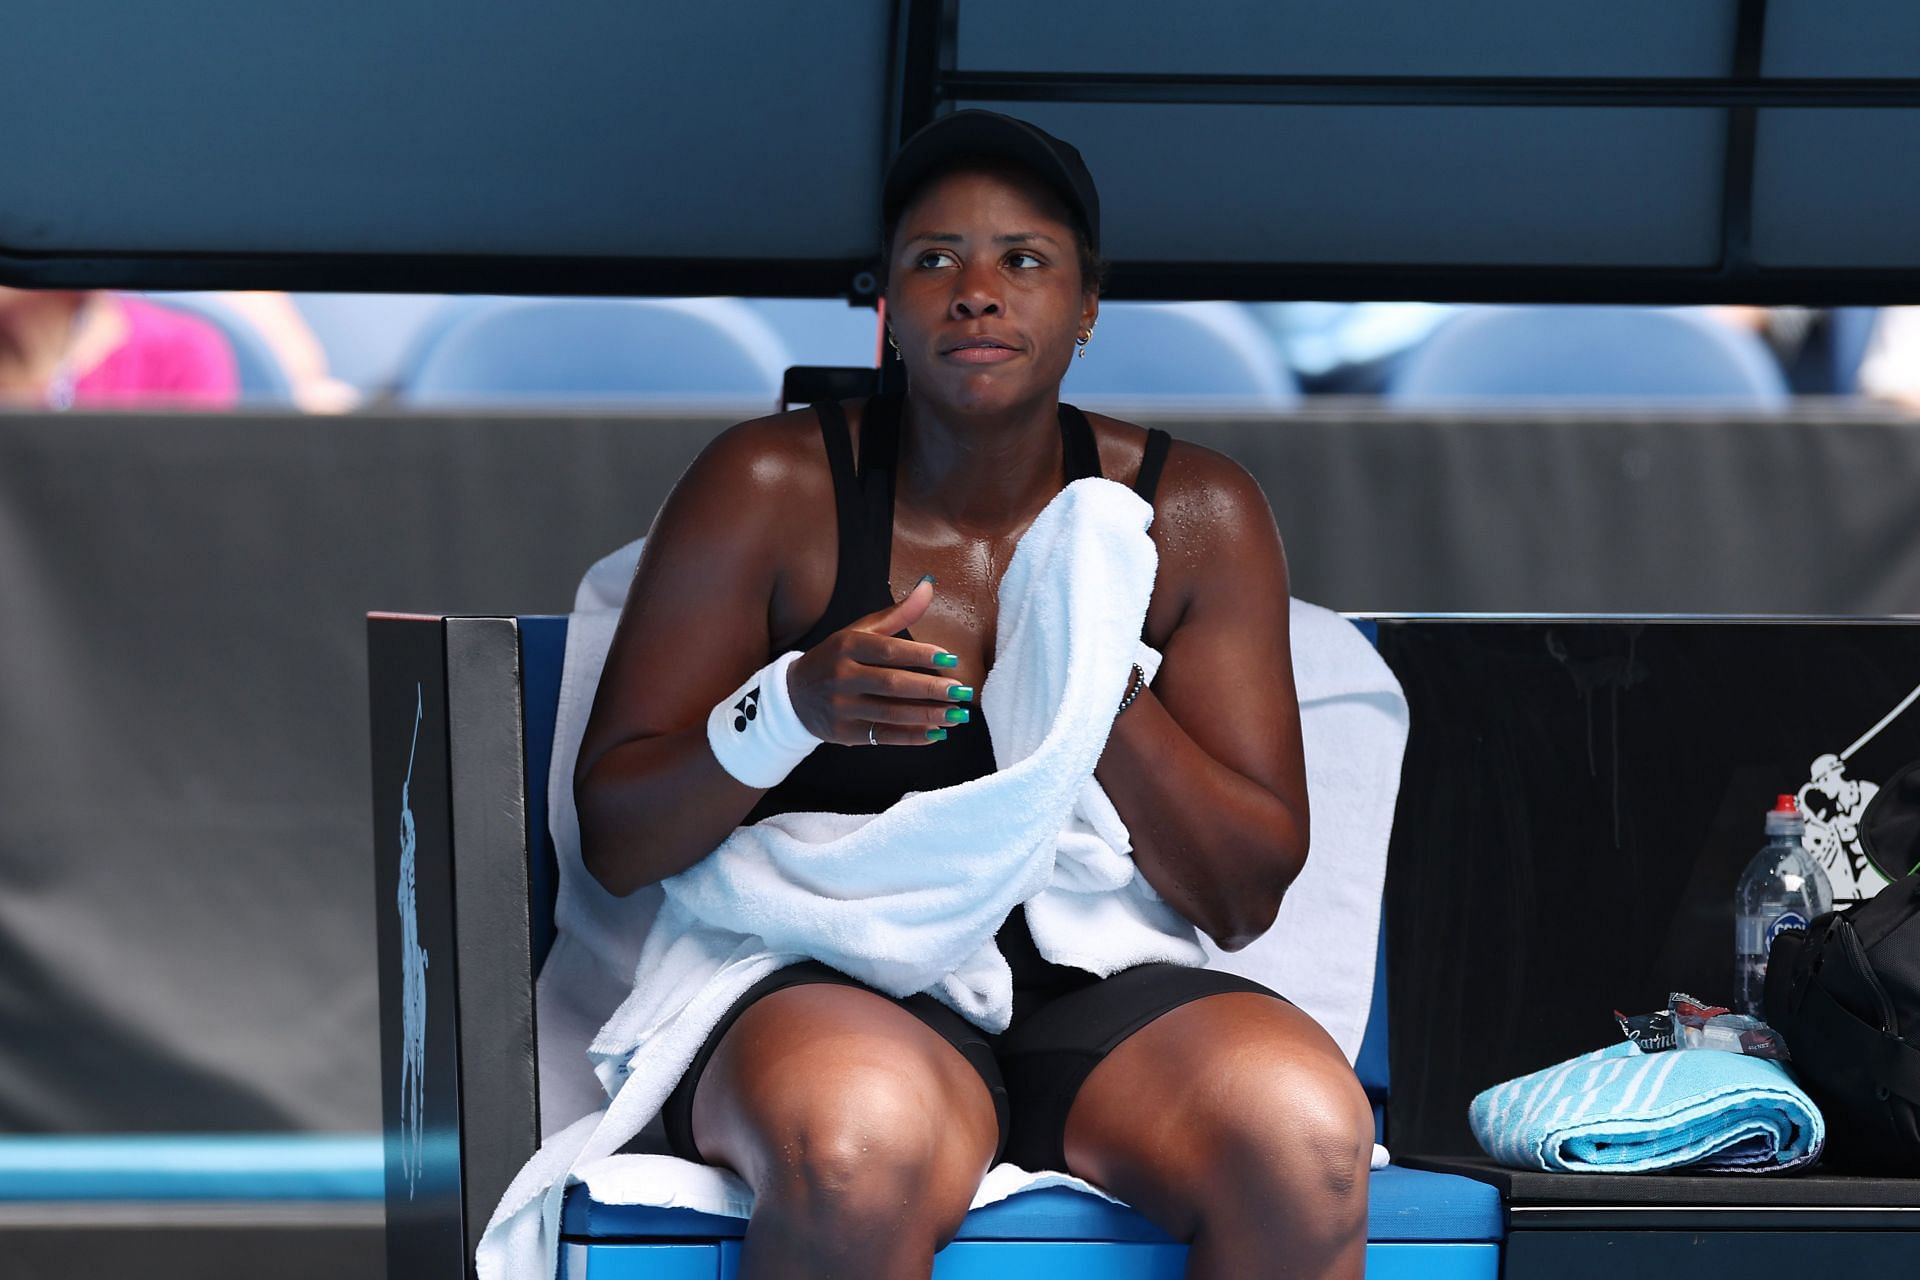 Taylor Townsend at the 2023 Australian Open.